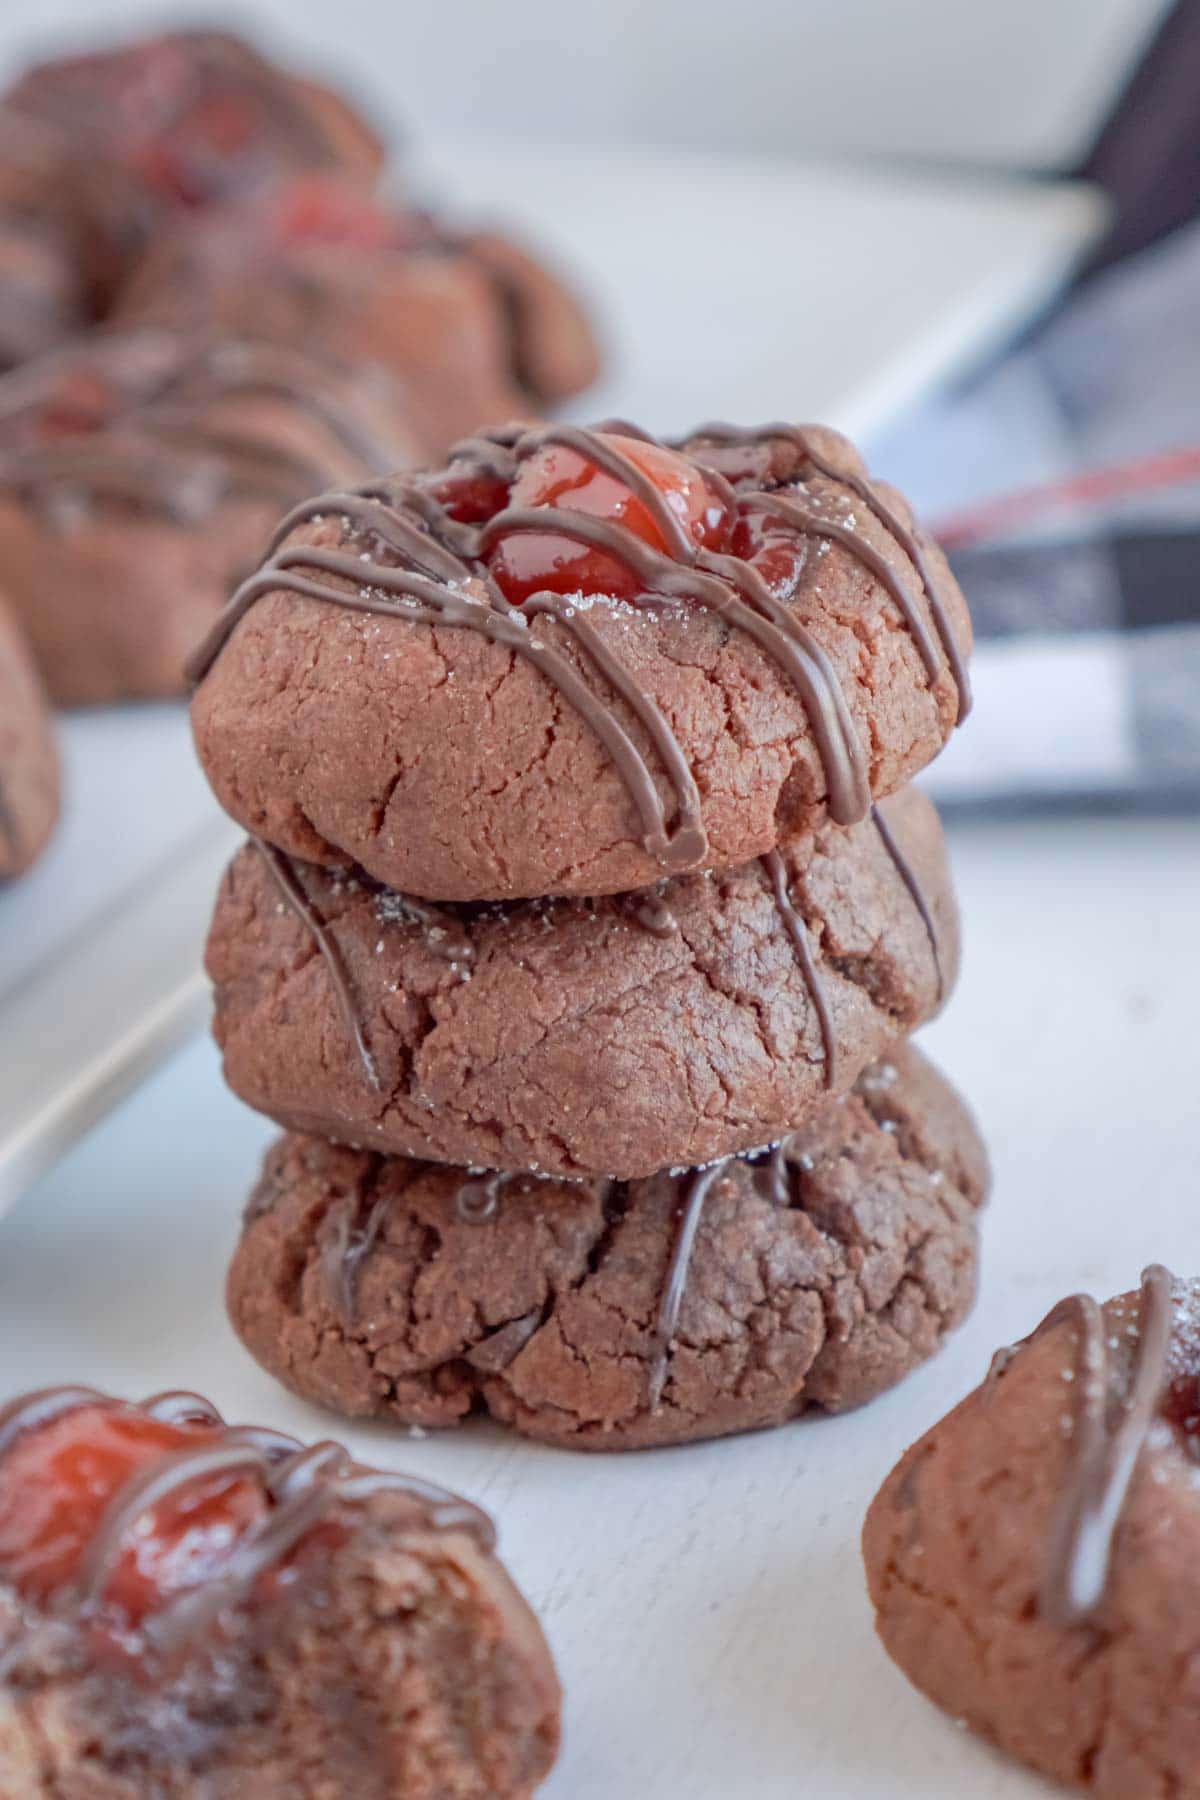 Stack of chocolate thumbprint cookies with cherries